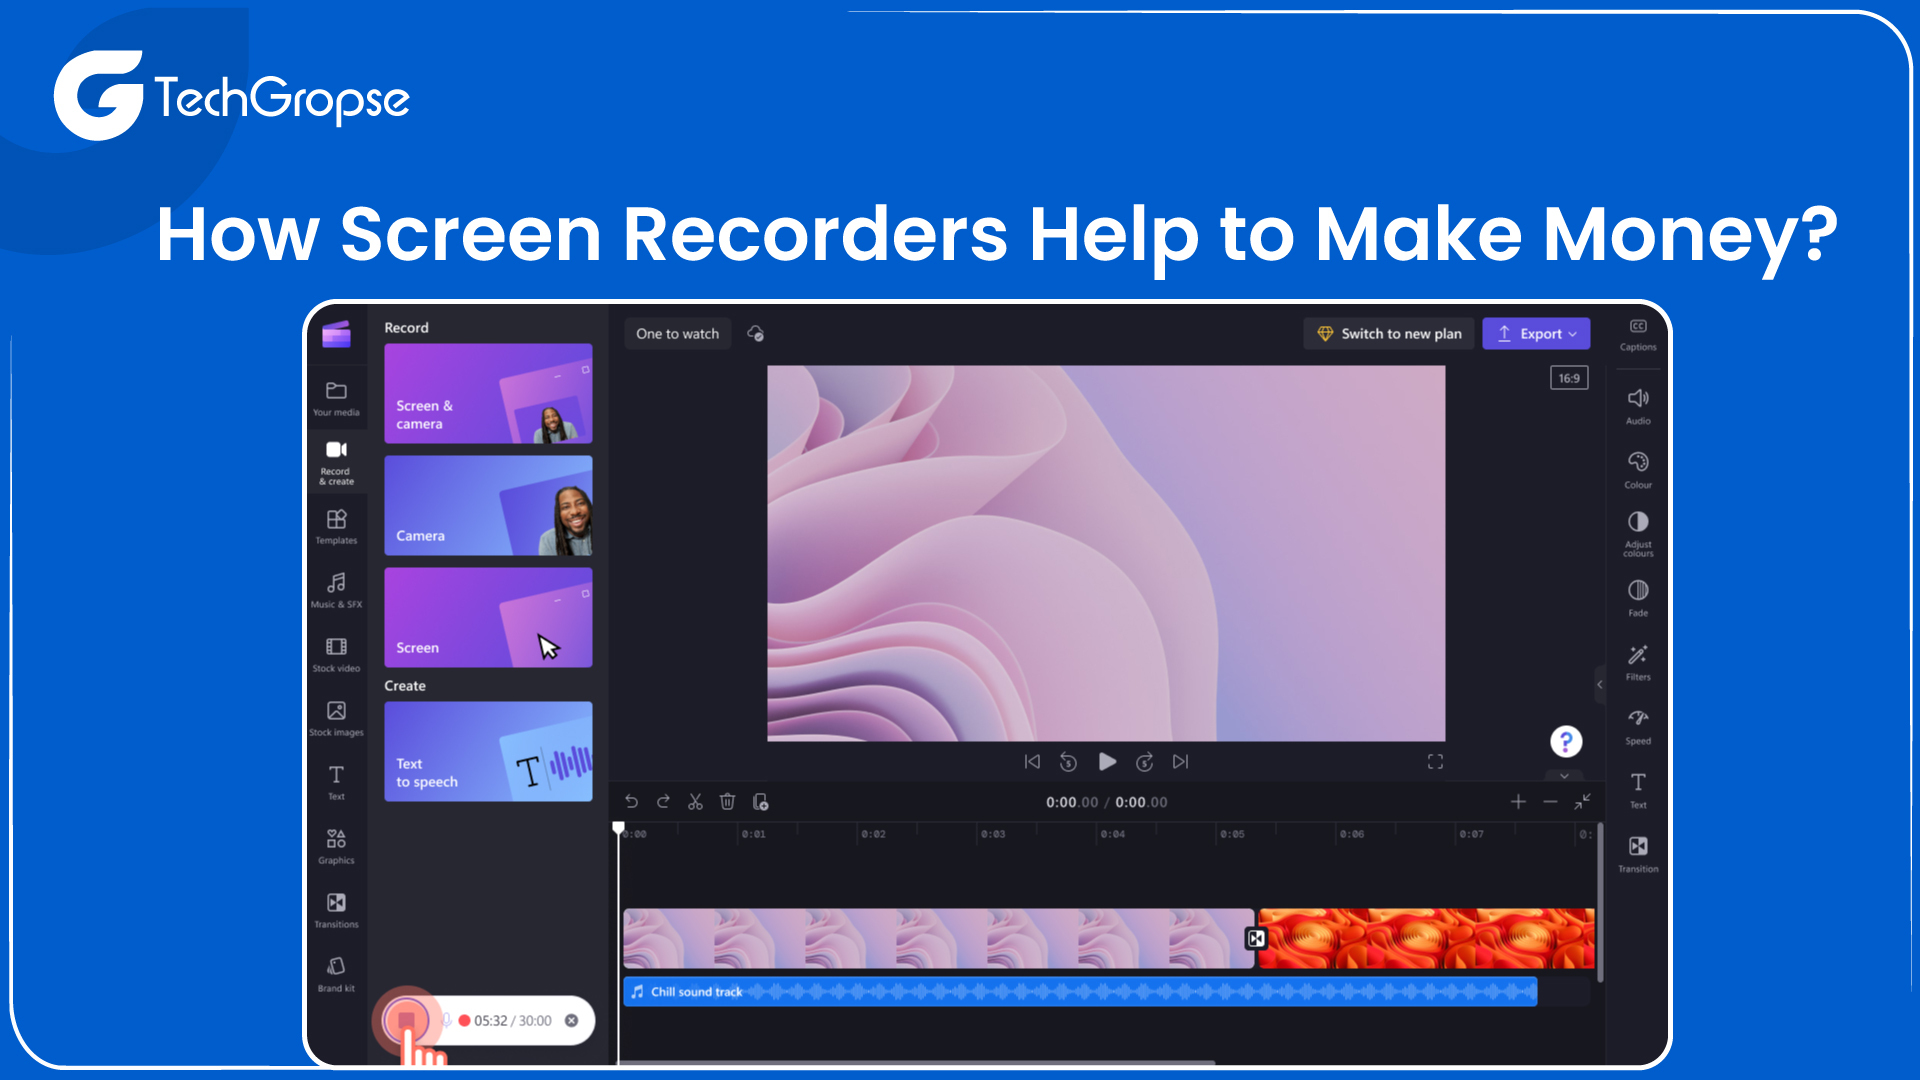 How Screen Recorders Help to Make Money?